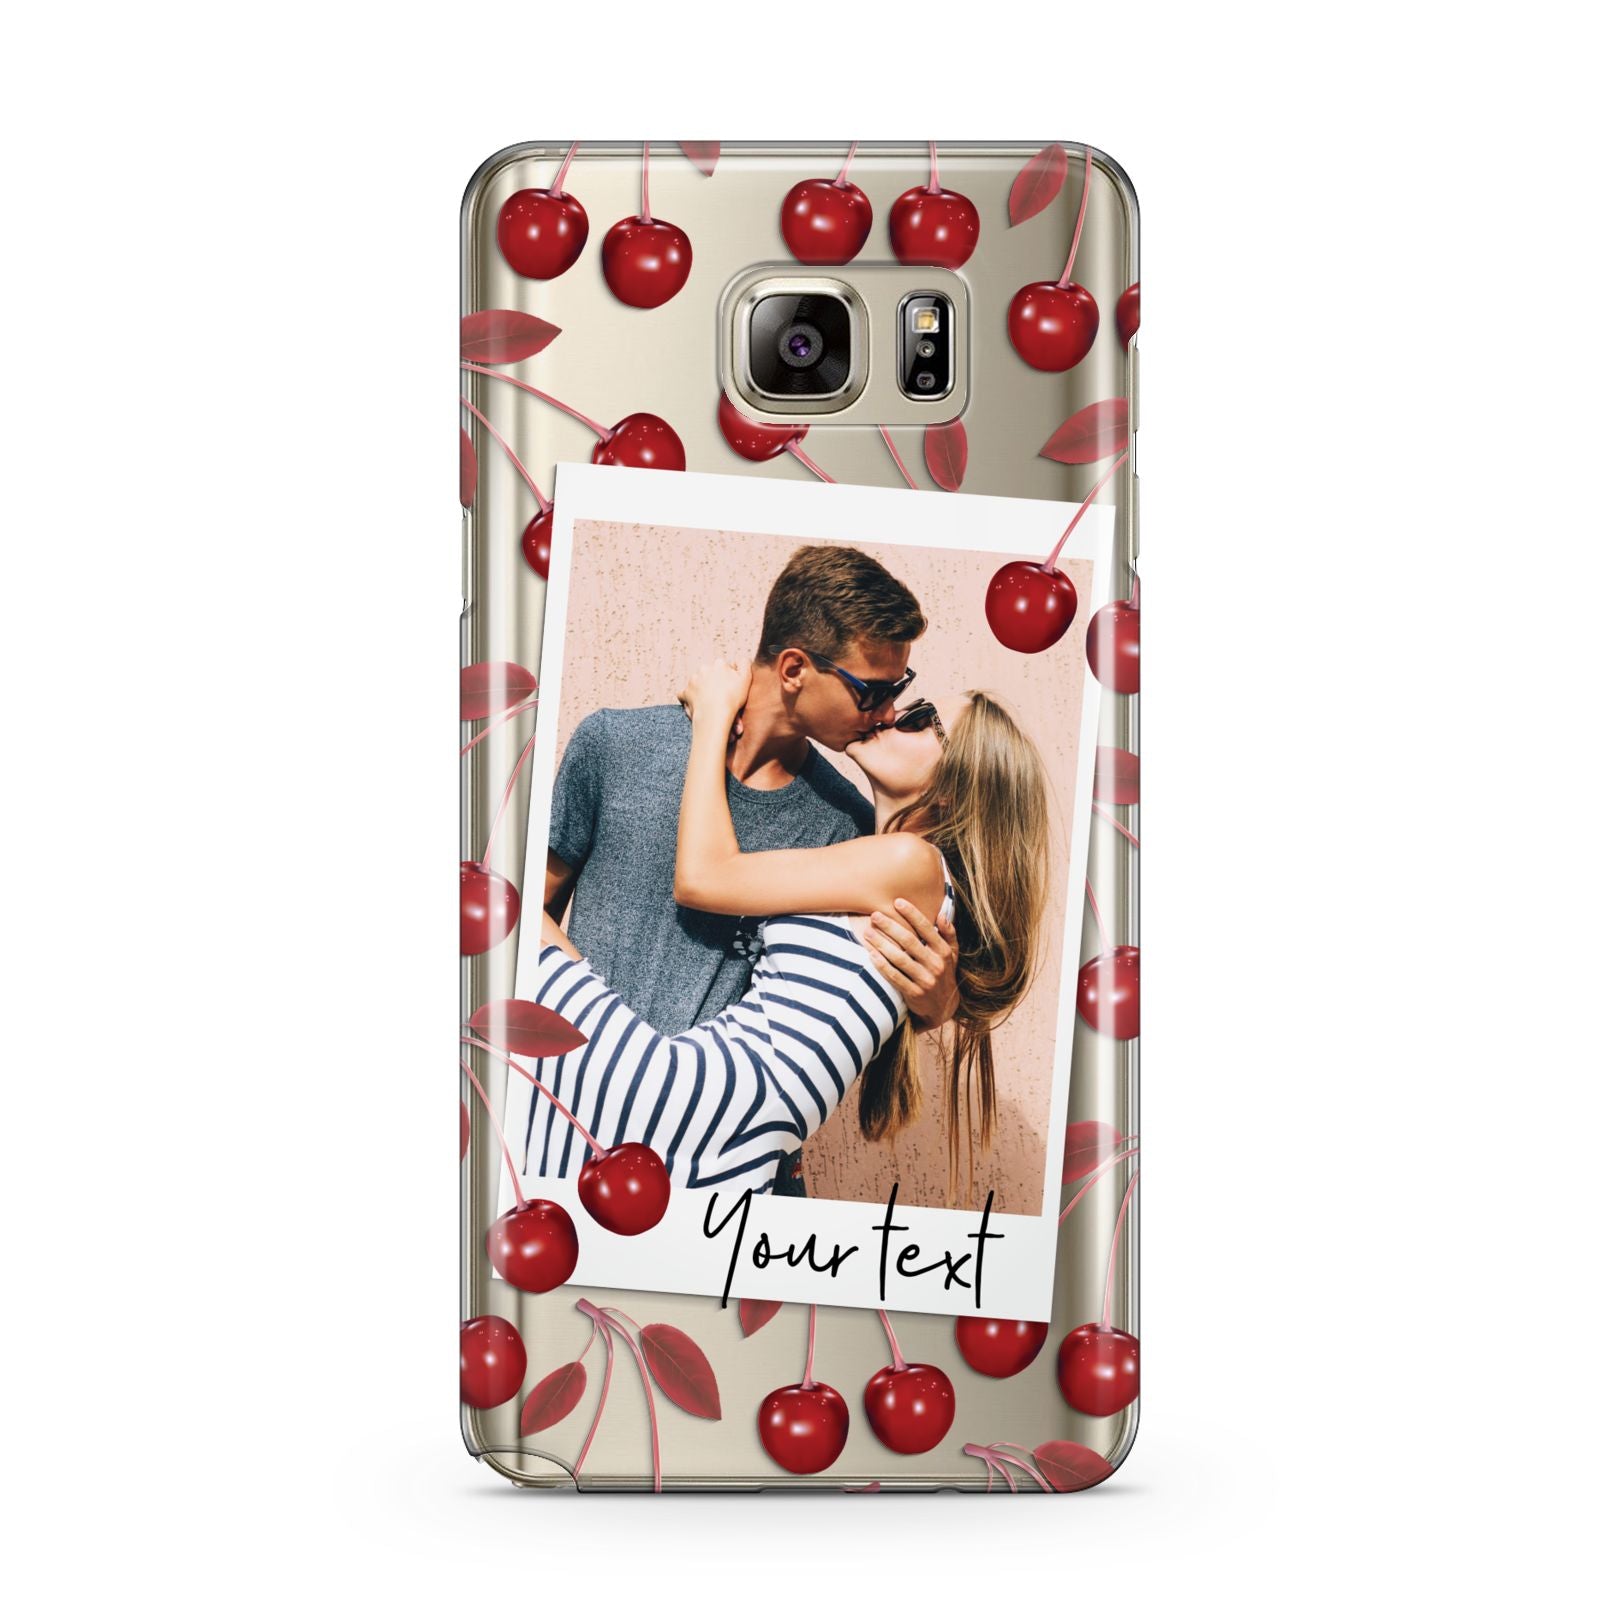 Personalised Photo Cherry Samsung Galaxy Note 5 Case